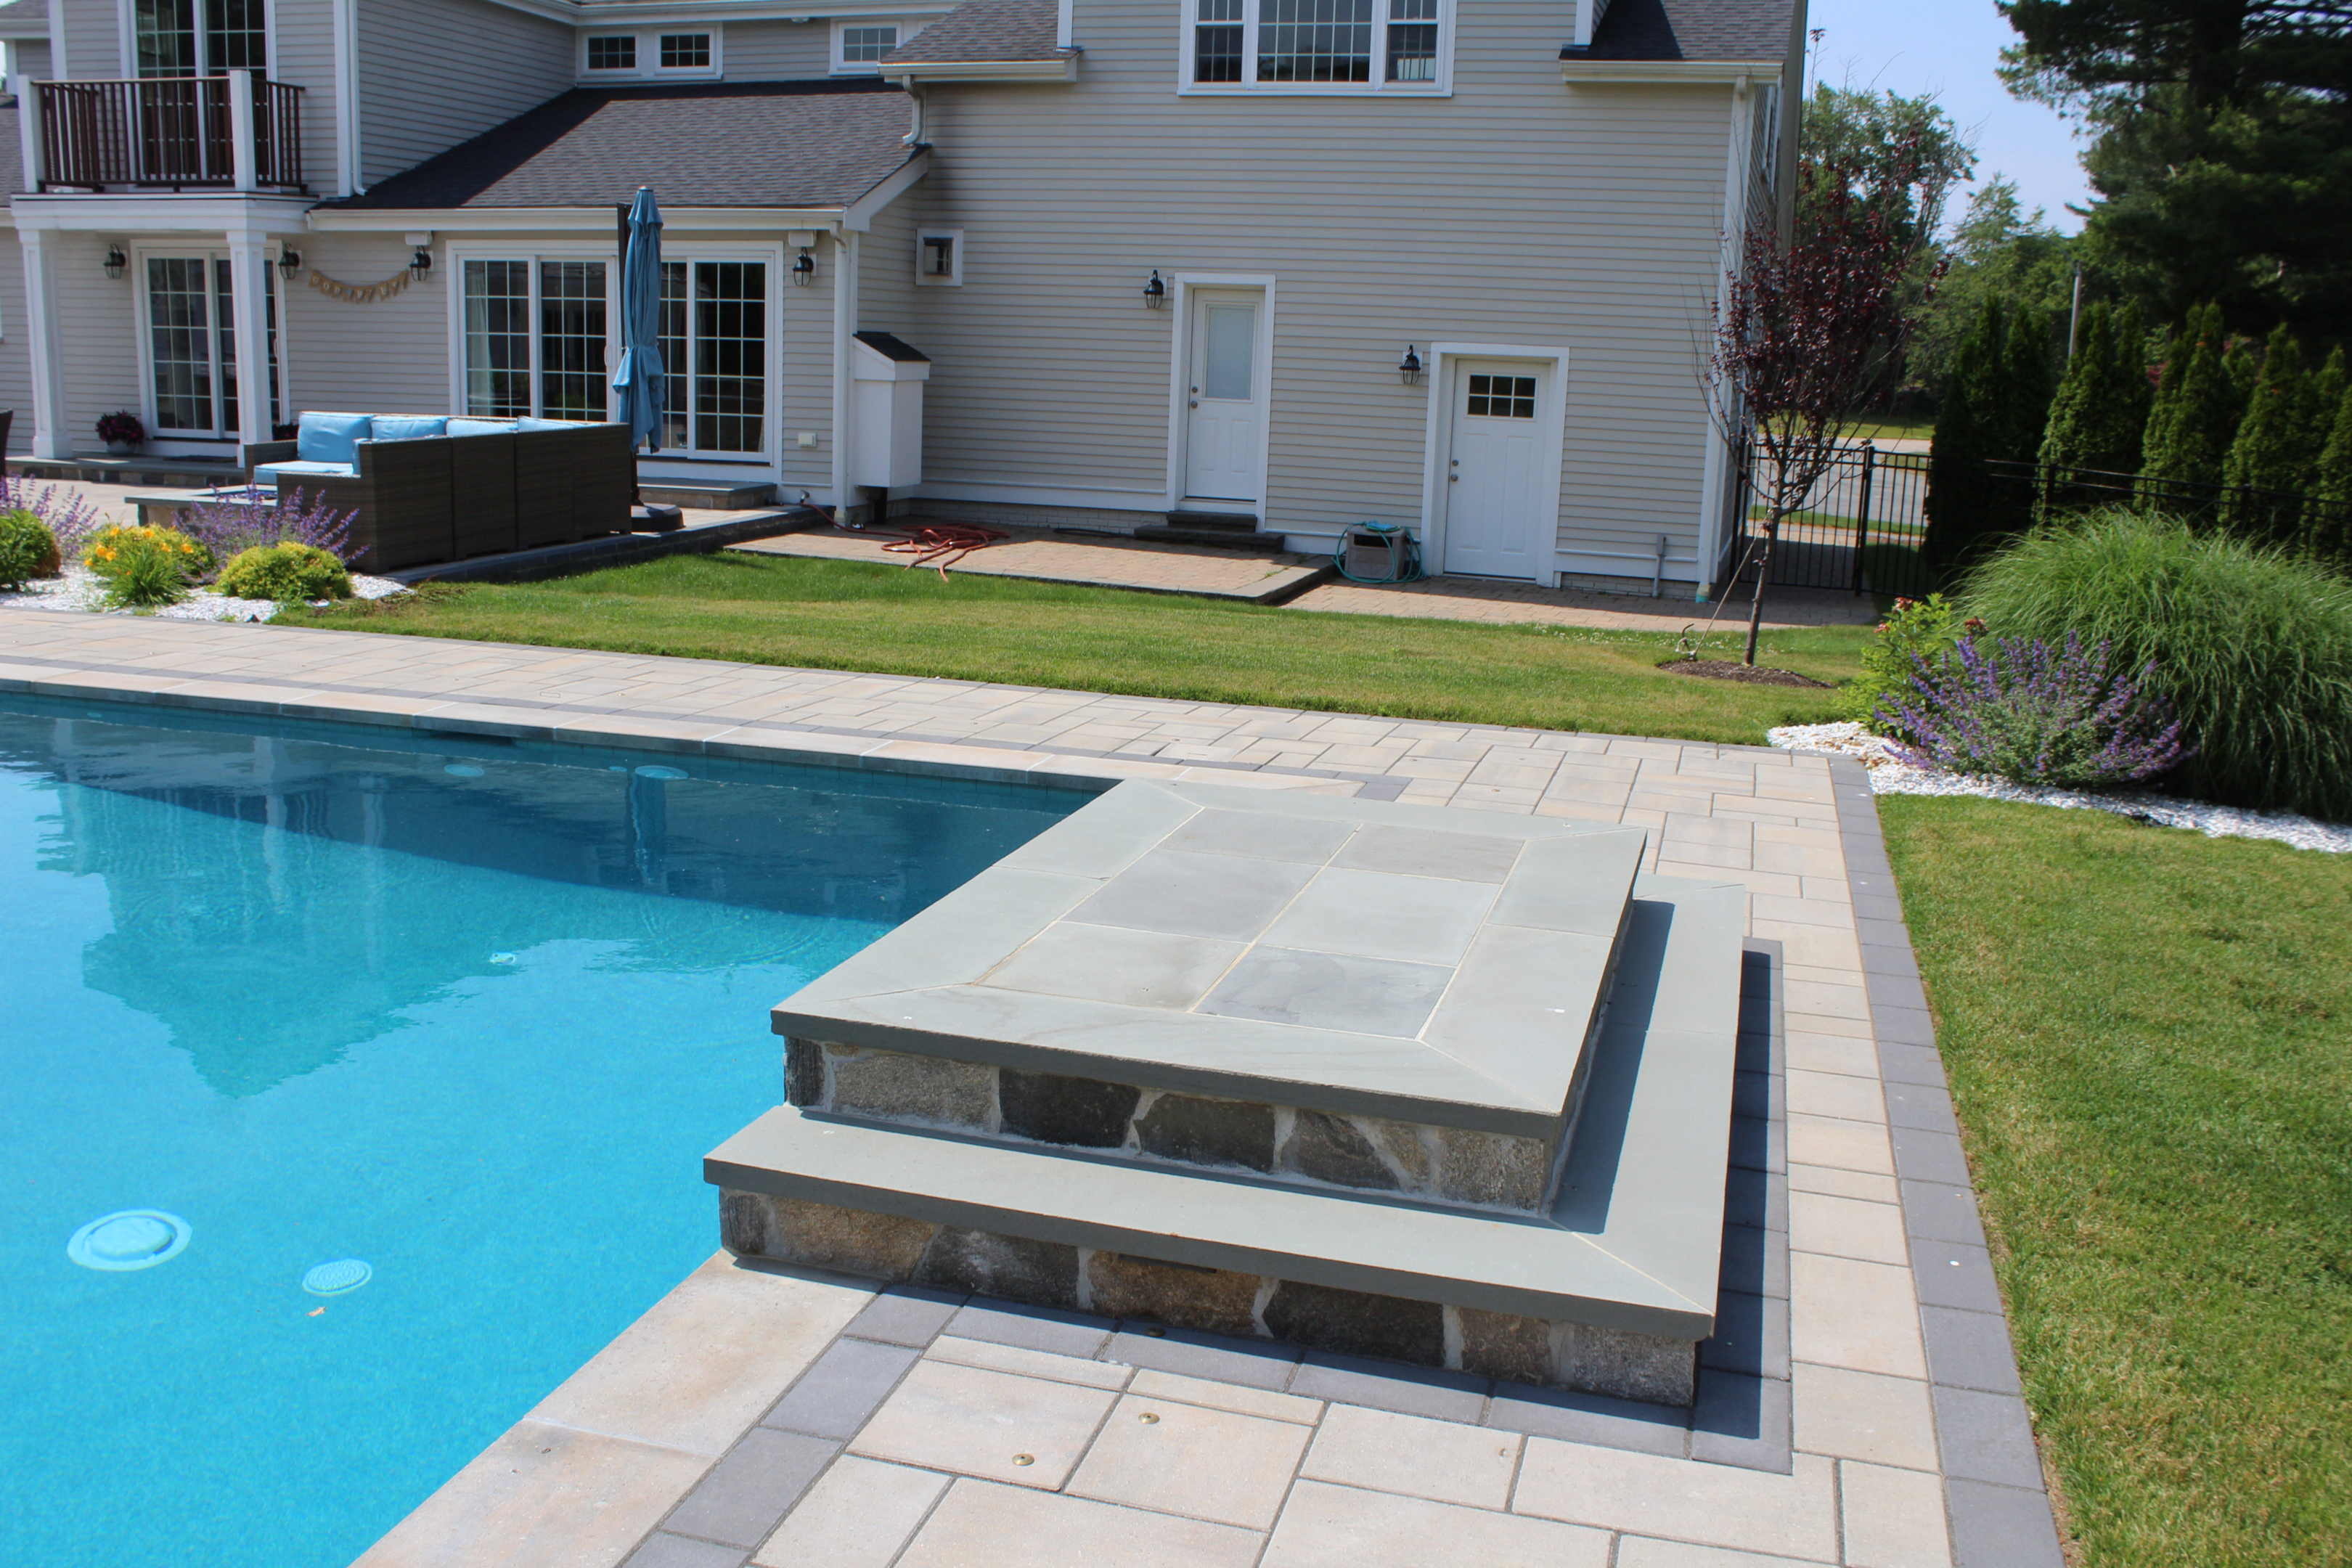 Modern pool deck design with vibrant colors, textures, and water features